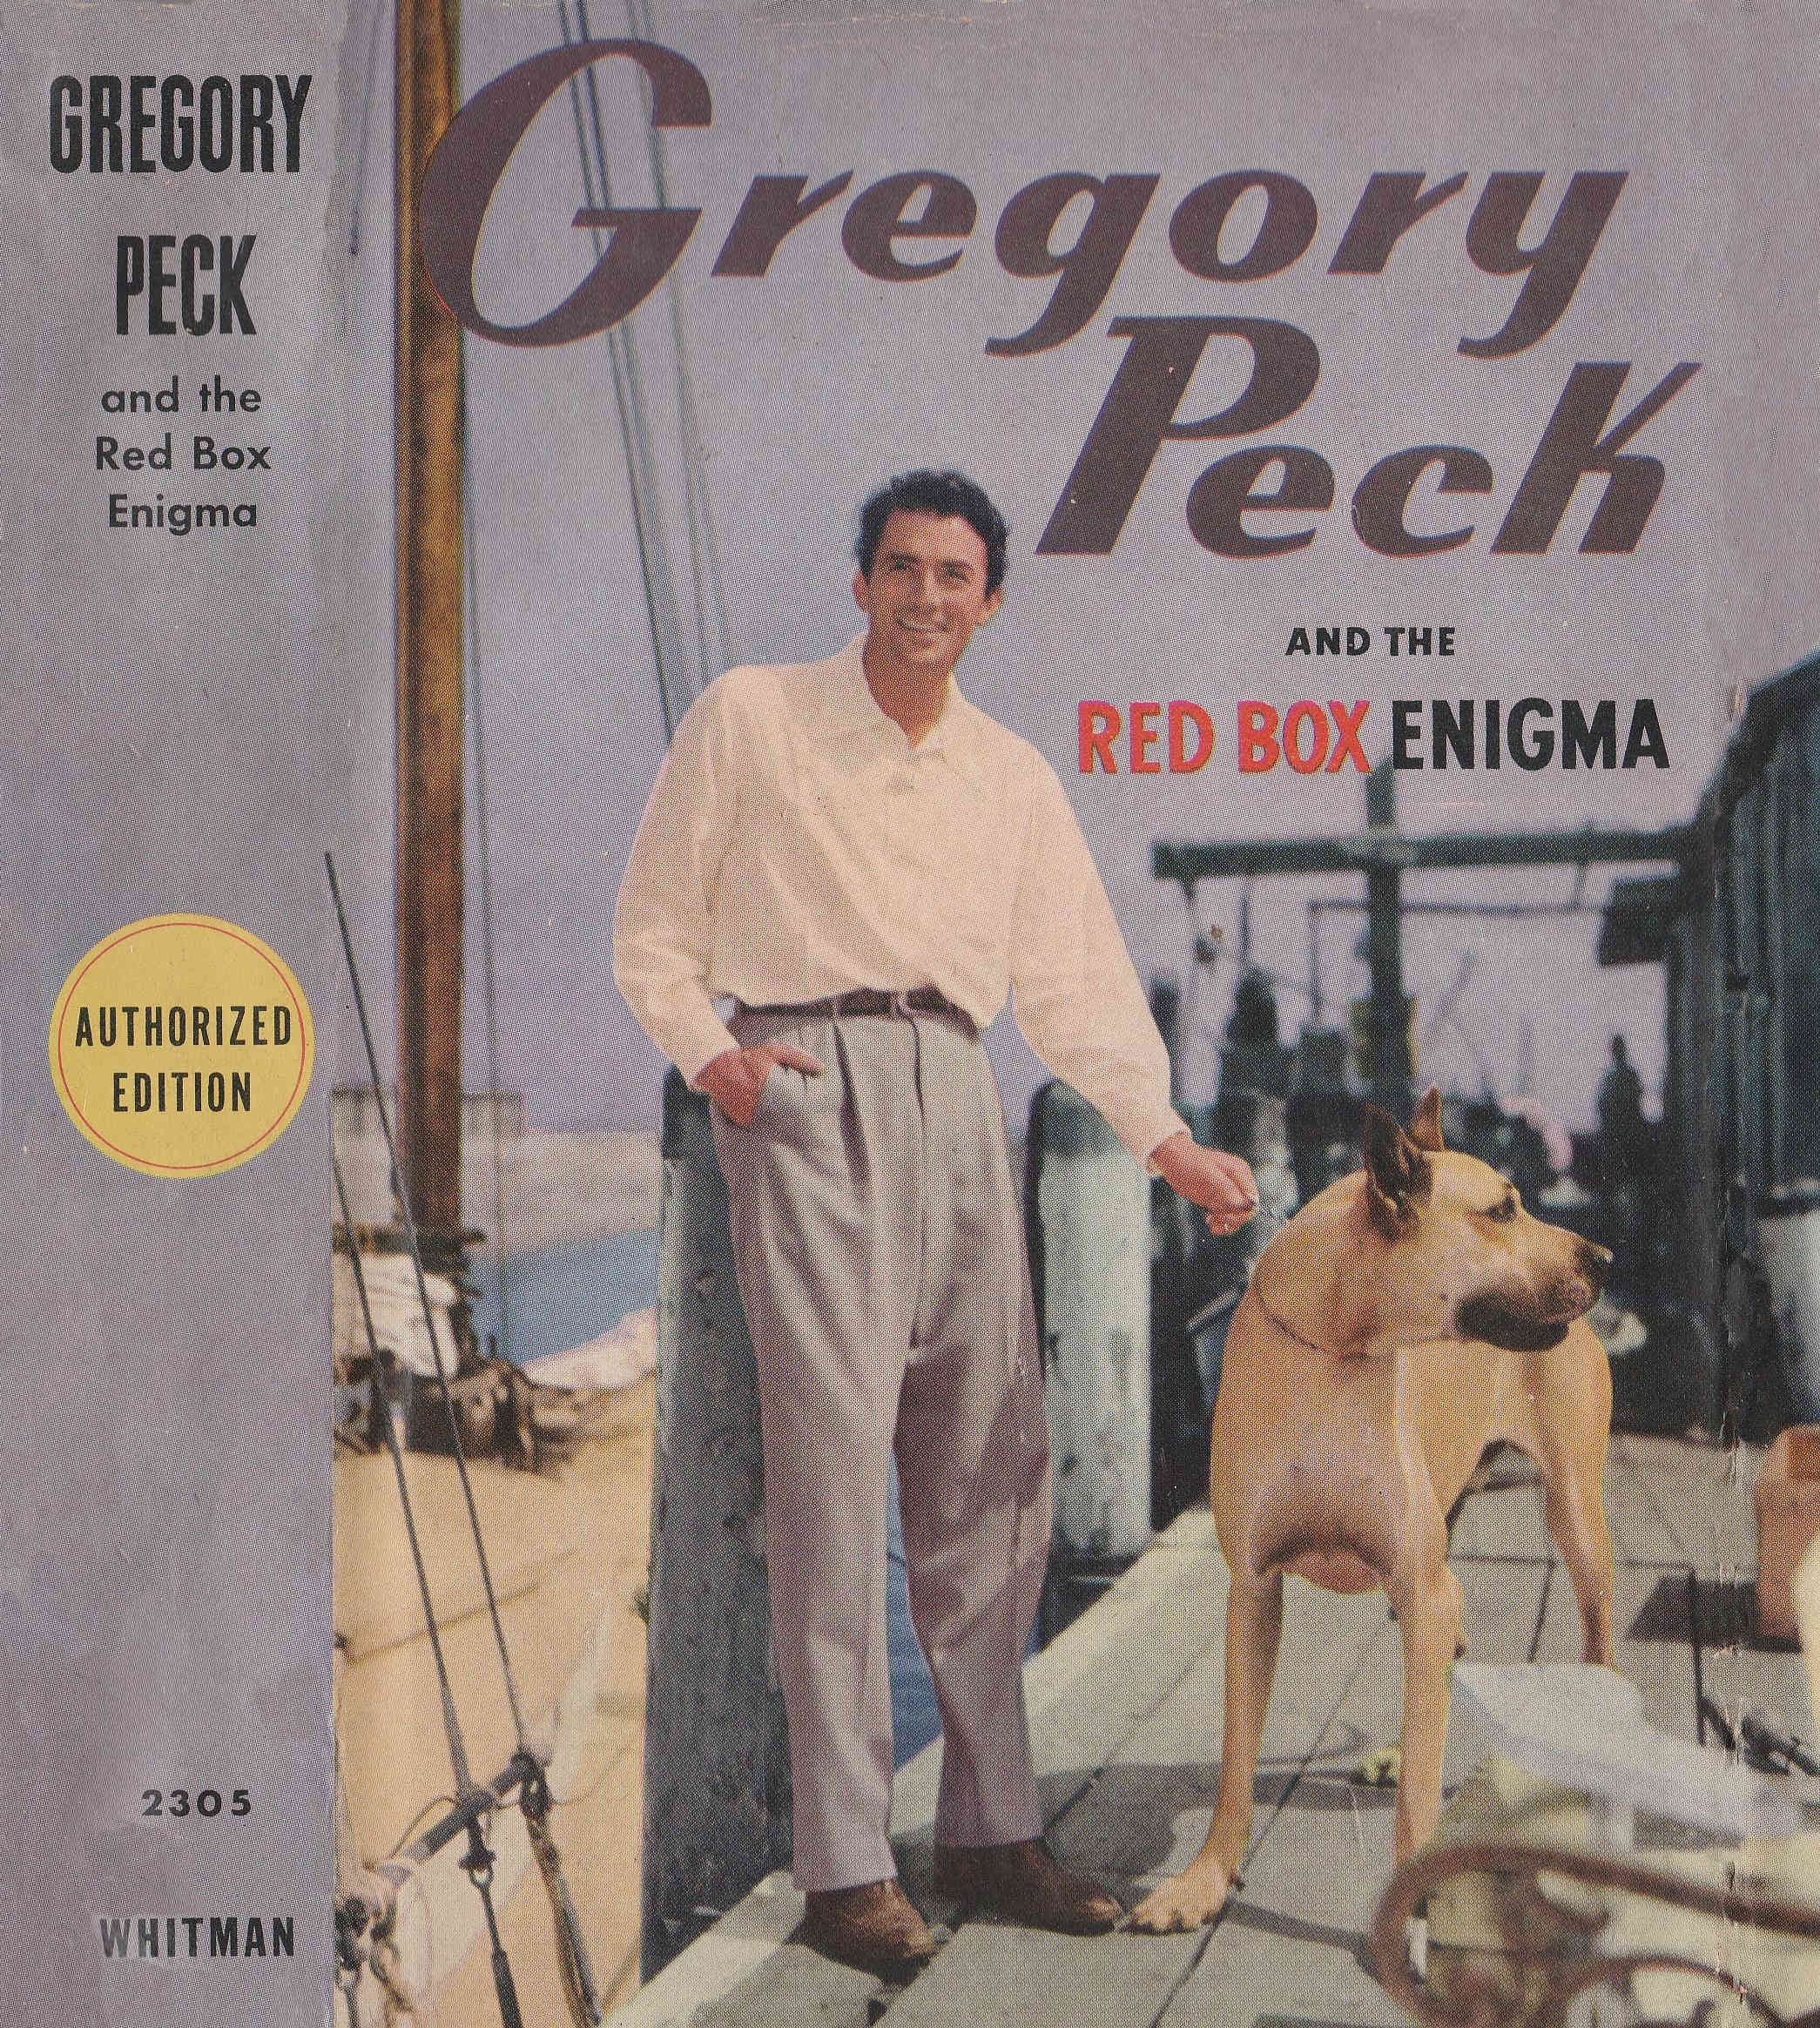 Gregory Peck and the Red Box Enigma